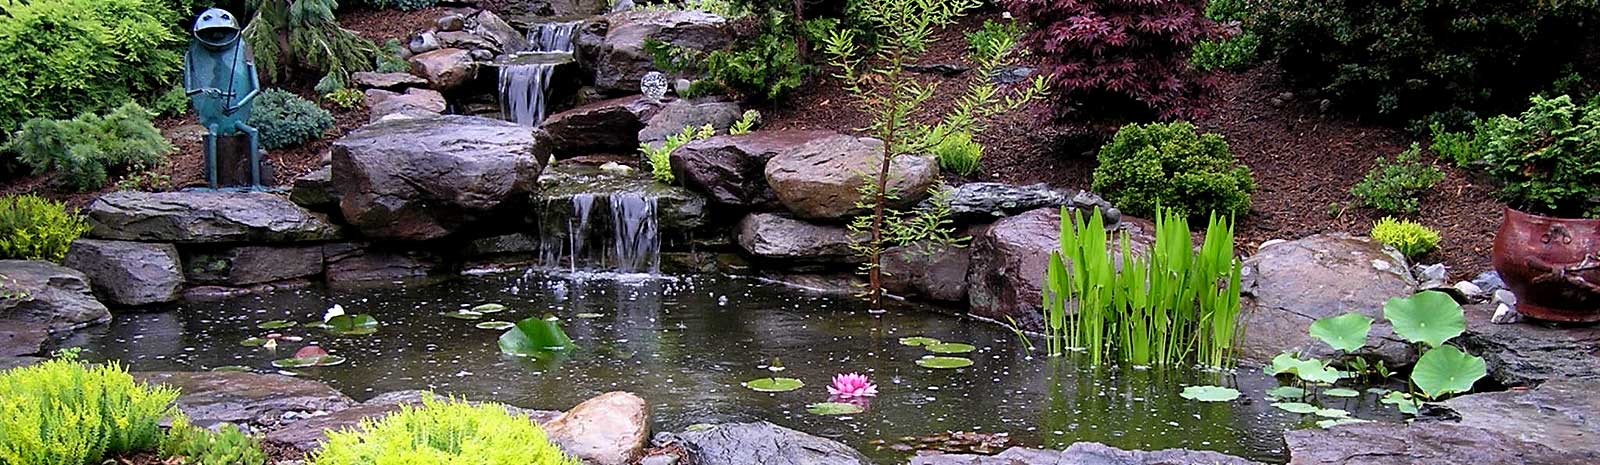 Pond with a waterfall, pond plants and landscaping - Pondscapes Maryland is a full service backyard sanctuary provider.